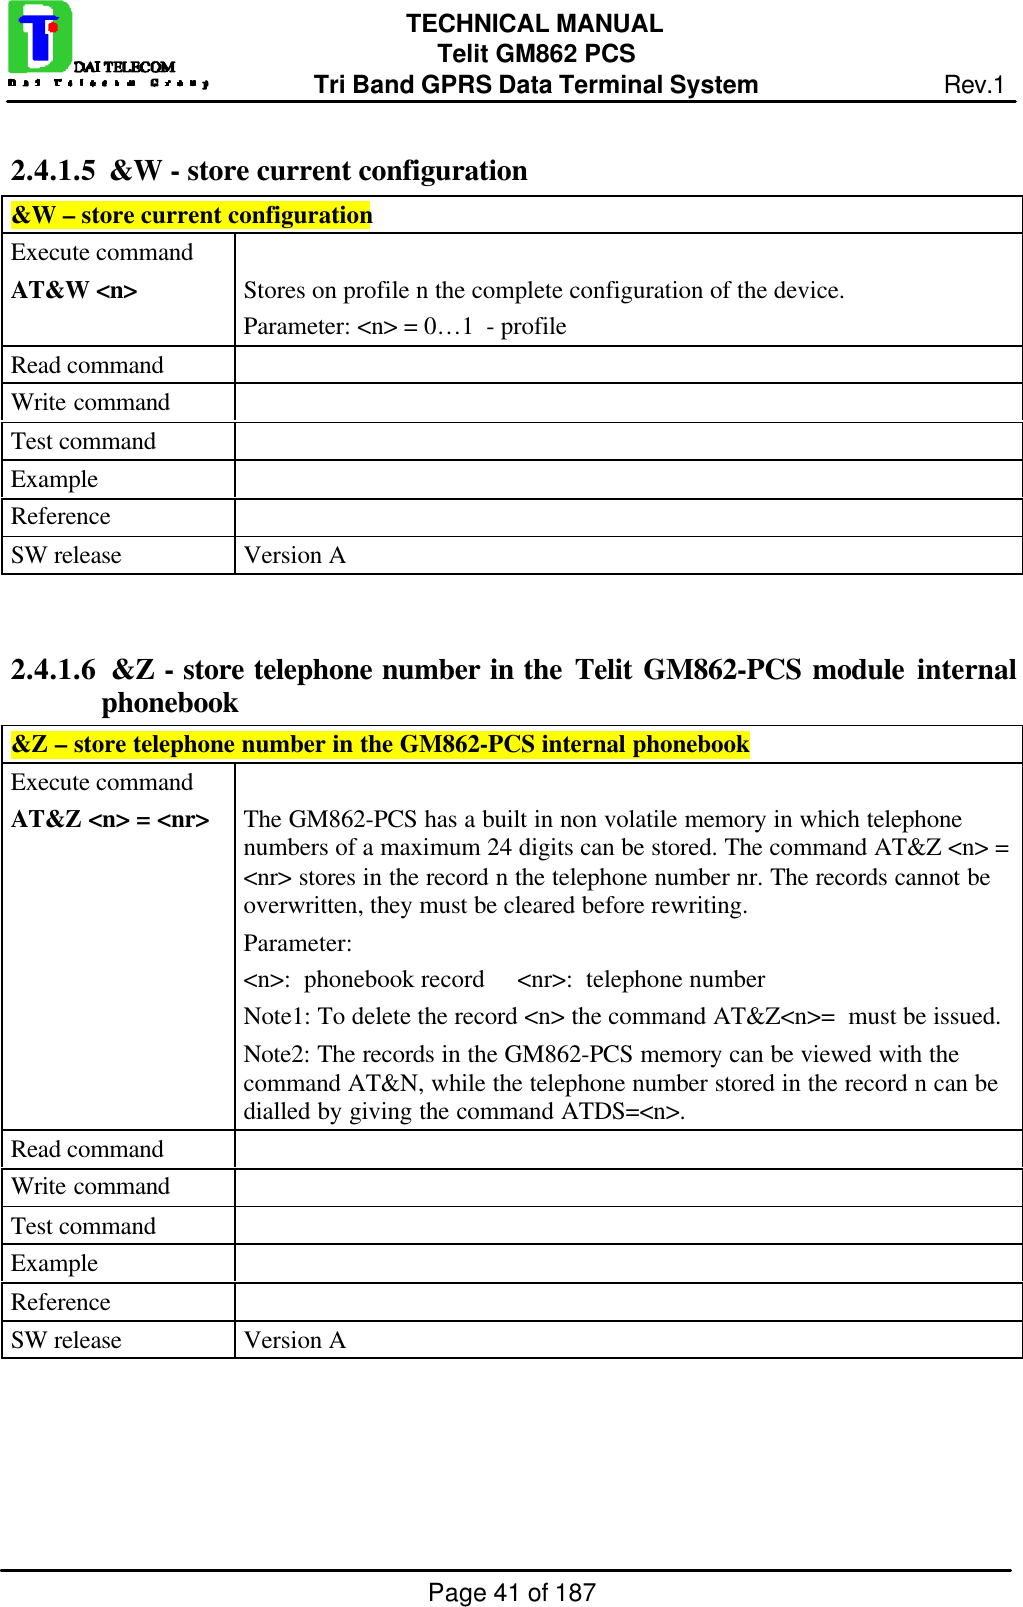 Page 41 of 187TECHNICAL MANUALTelit GM862 PCSTri Band GPRS Data Terminal System Rev.12.4.1.5  &amp;W - store current configuration&amp;W – store current configurationExecute commandAT&amp;W &lt;n&gt; Stores on profile n the complete configuration of the device.Parameter: &lt;n&gt; = 0…1  - profileRead commandWrite commandTest commandExampleReferenceSW release Version A2.4.1.6  &amp;Z - store telephone number in the Telit GM862-PCS module internalphonebook&amp;Z – store telephone number in the GM862-PCS internal phonebookExecute commandAT&amp;Z &lt;n&gt; = &lt;nr&gt; The GM862-PCS has a built in non volatile memory in which telephonenumbers of a maximum 24 digits can be stored. The command AT&amp;Z &lt;n&gt; =&lt;nr&gt; stores in the record n the telephone number nr. The records cannot beoverwritten, they must be cleared before rewriting.Parameter:&lt;n&gt;:  phonebook record     &lt;nr&gt;:  telephone numberNote1: To delete the record &lt;n&gt; the command AT&amp;Z&lt;n&gt;=  must be issued.Note2: The records in the GM862-PCS memory can be viewed with thecommand AT&amp;N, while the telephone number stored in the record n can bedialled by giving the command ATDS=&lt;n&gt;.Read commandWrite commandTest commandExampleReferenceSW release Version A